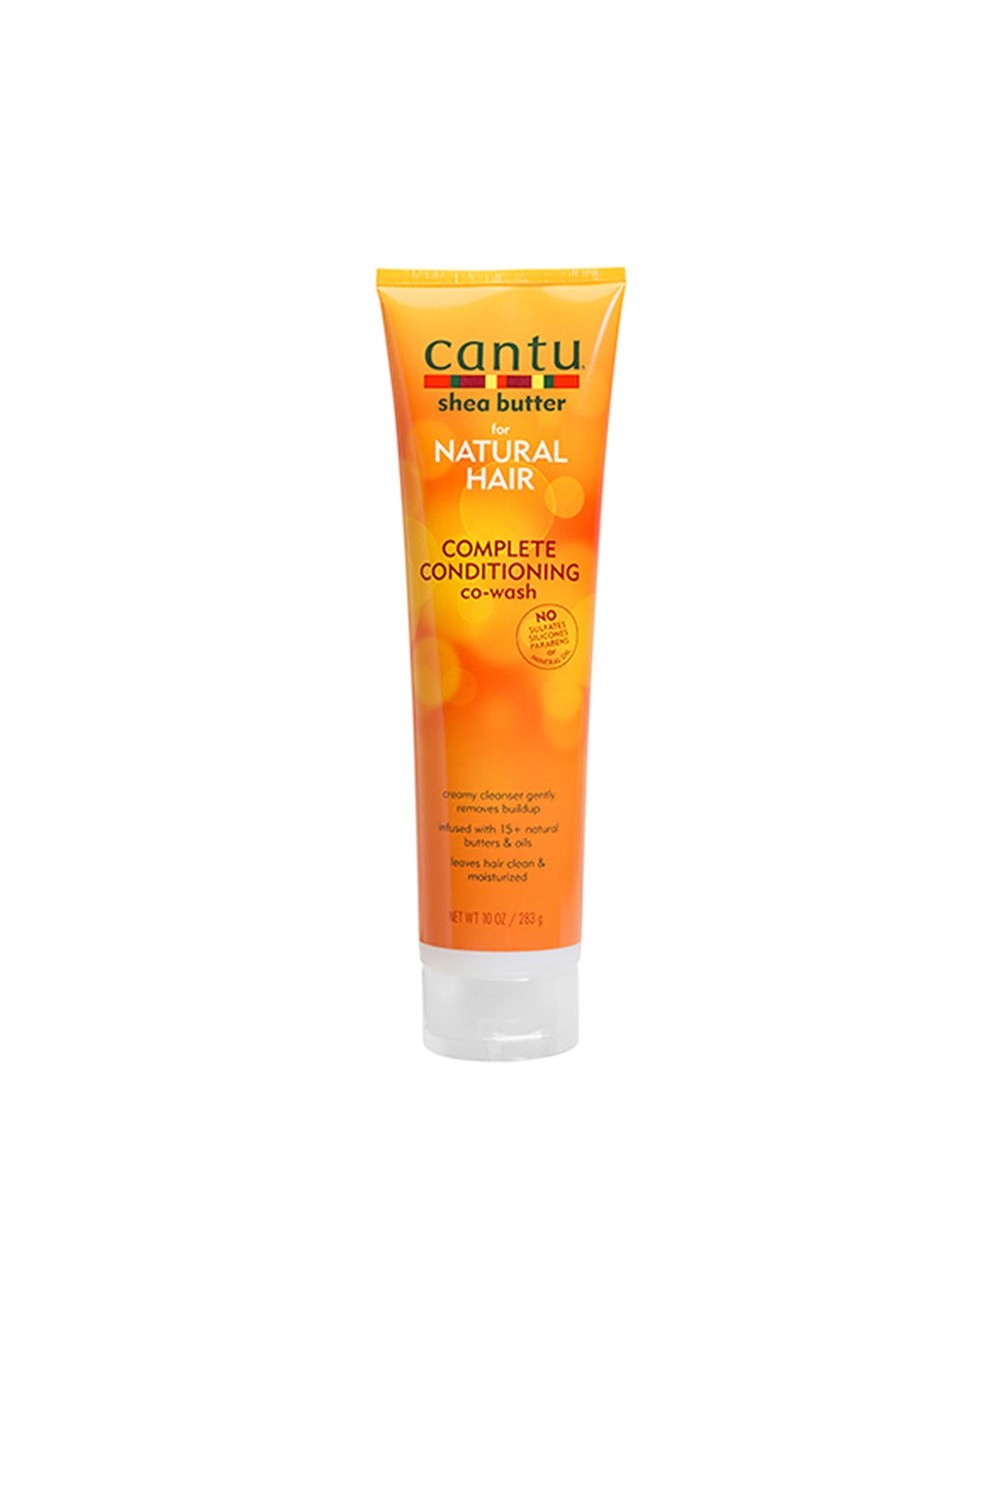 Cantu For Natural Hair Complete Conditioning Co-Wash 283g